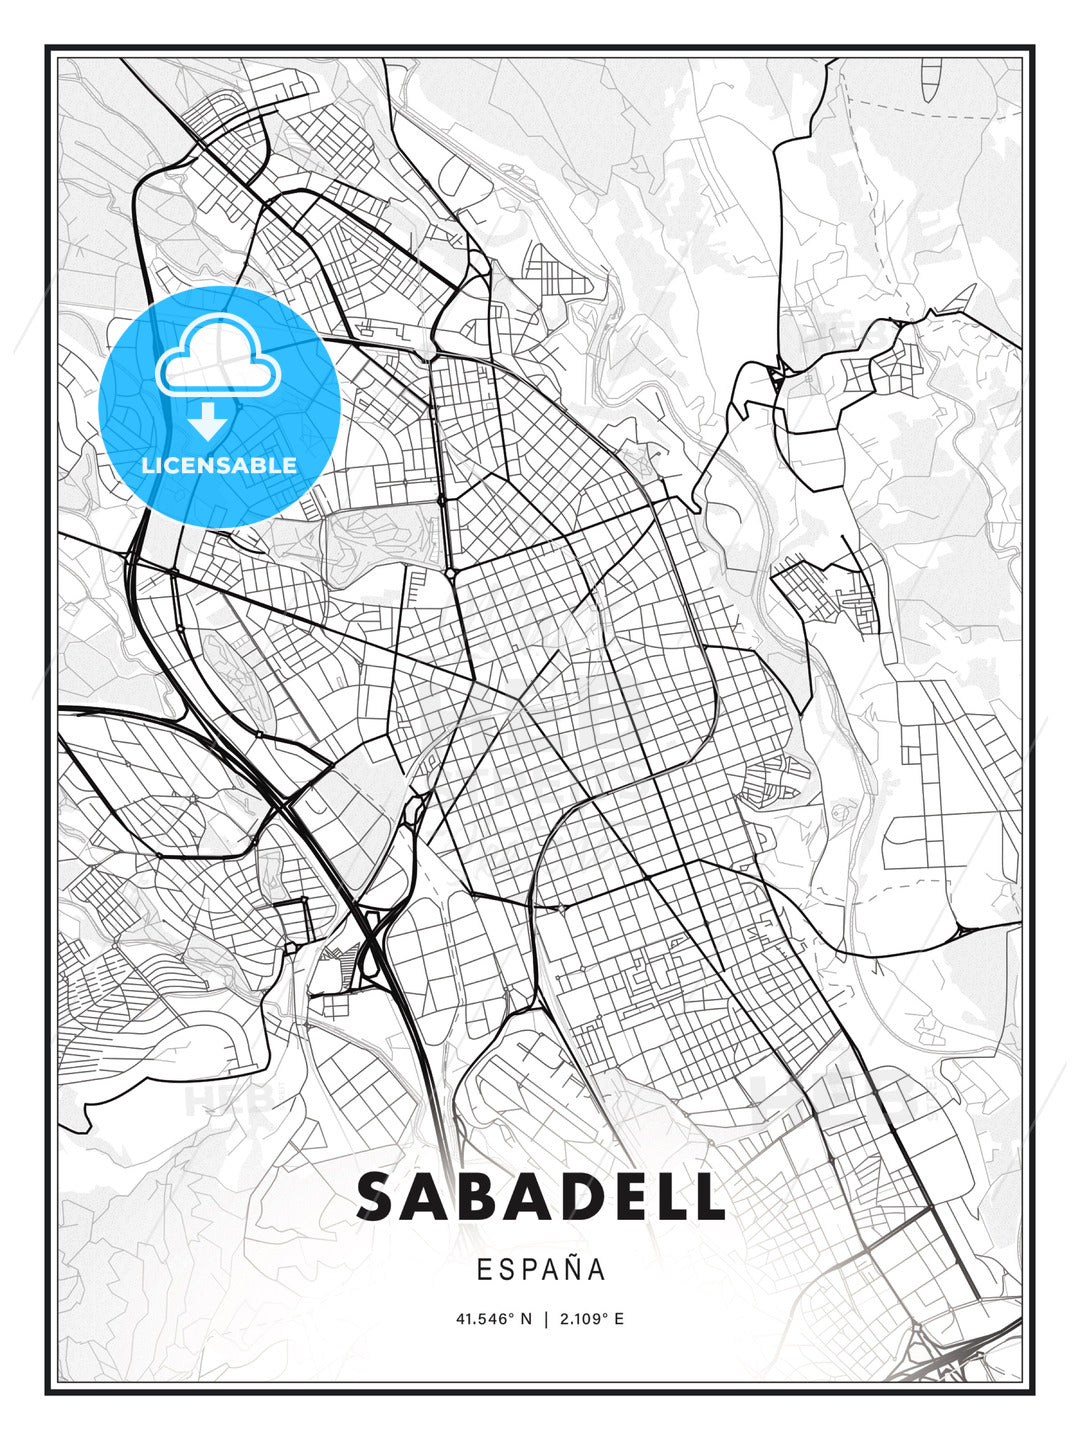 Sabadell, Spain, Modern Print Template in Various Formats - HEBSTREITS Sketches